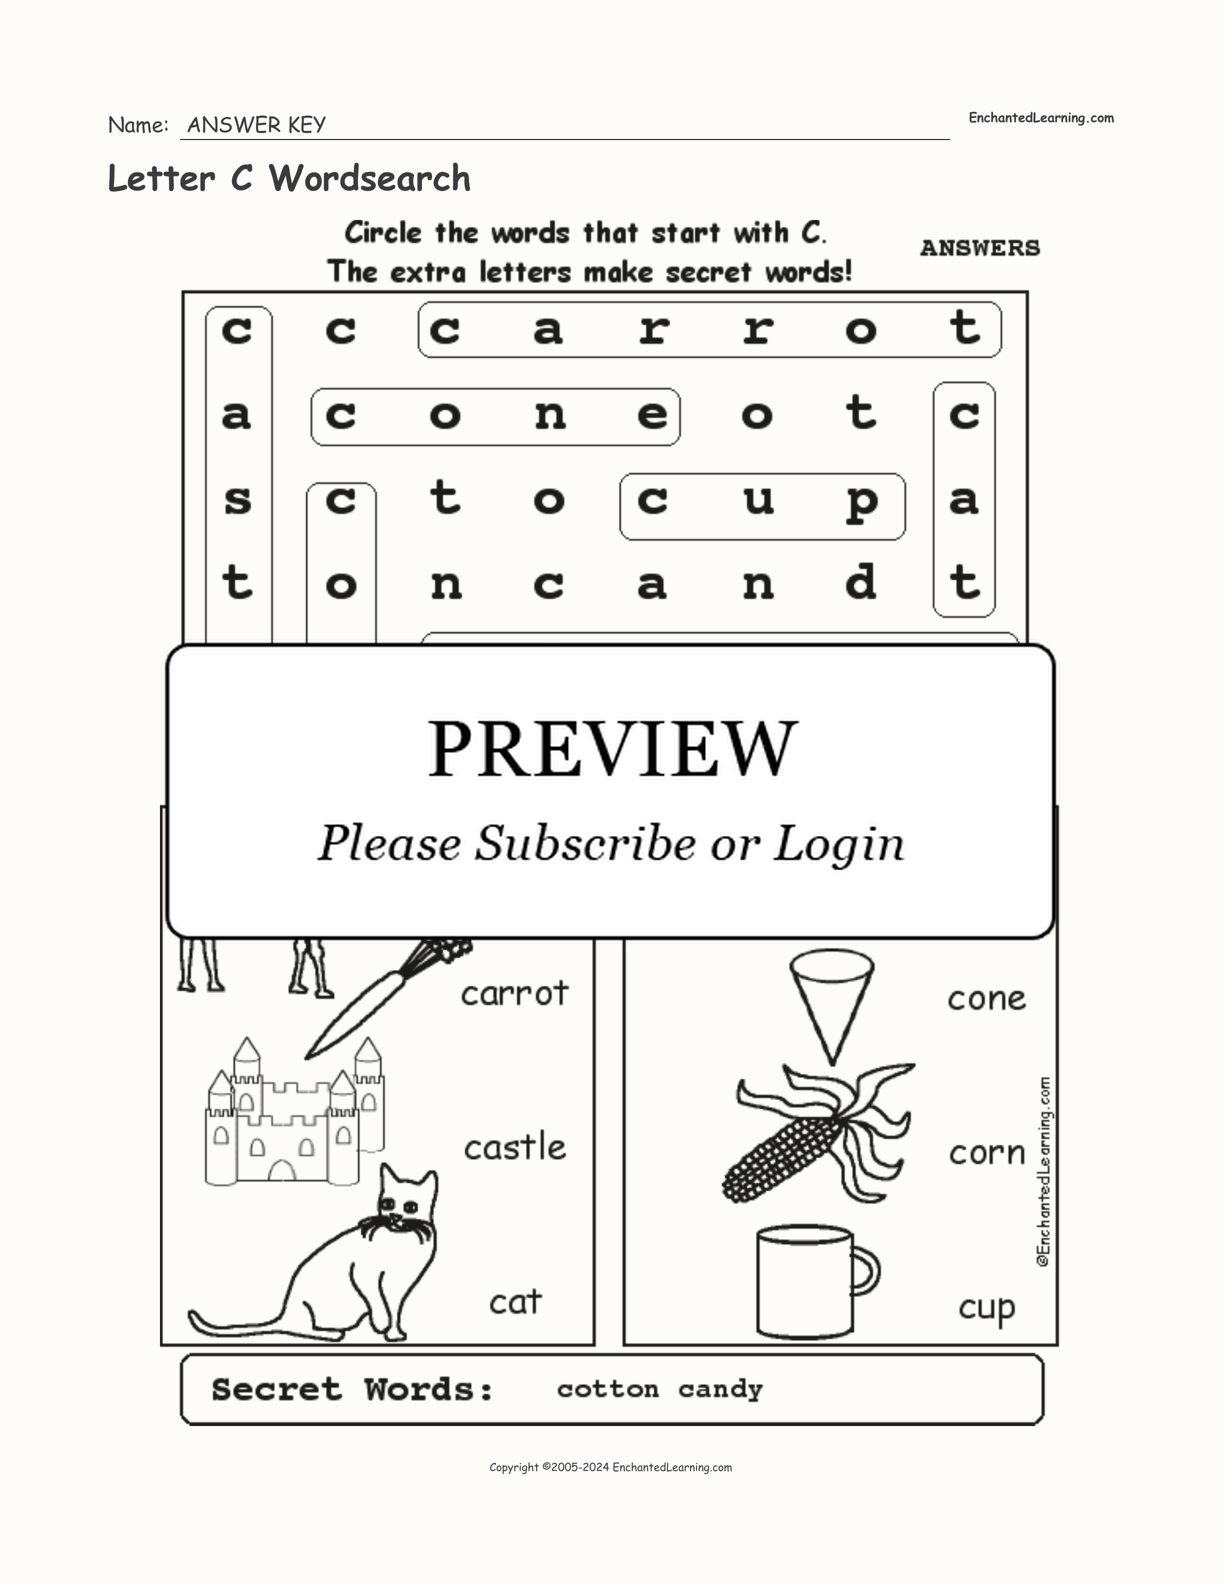 Letter C Wordsearch interactive worksheet page 2